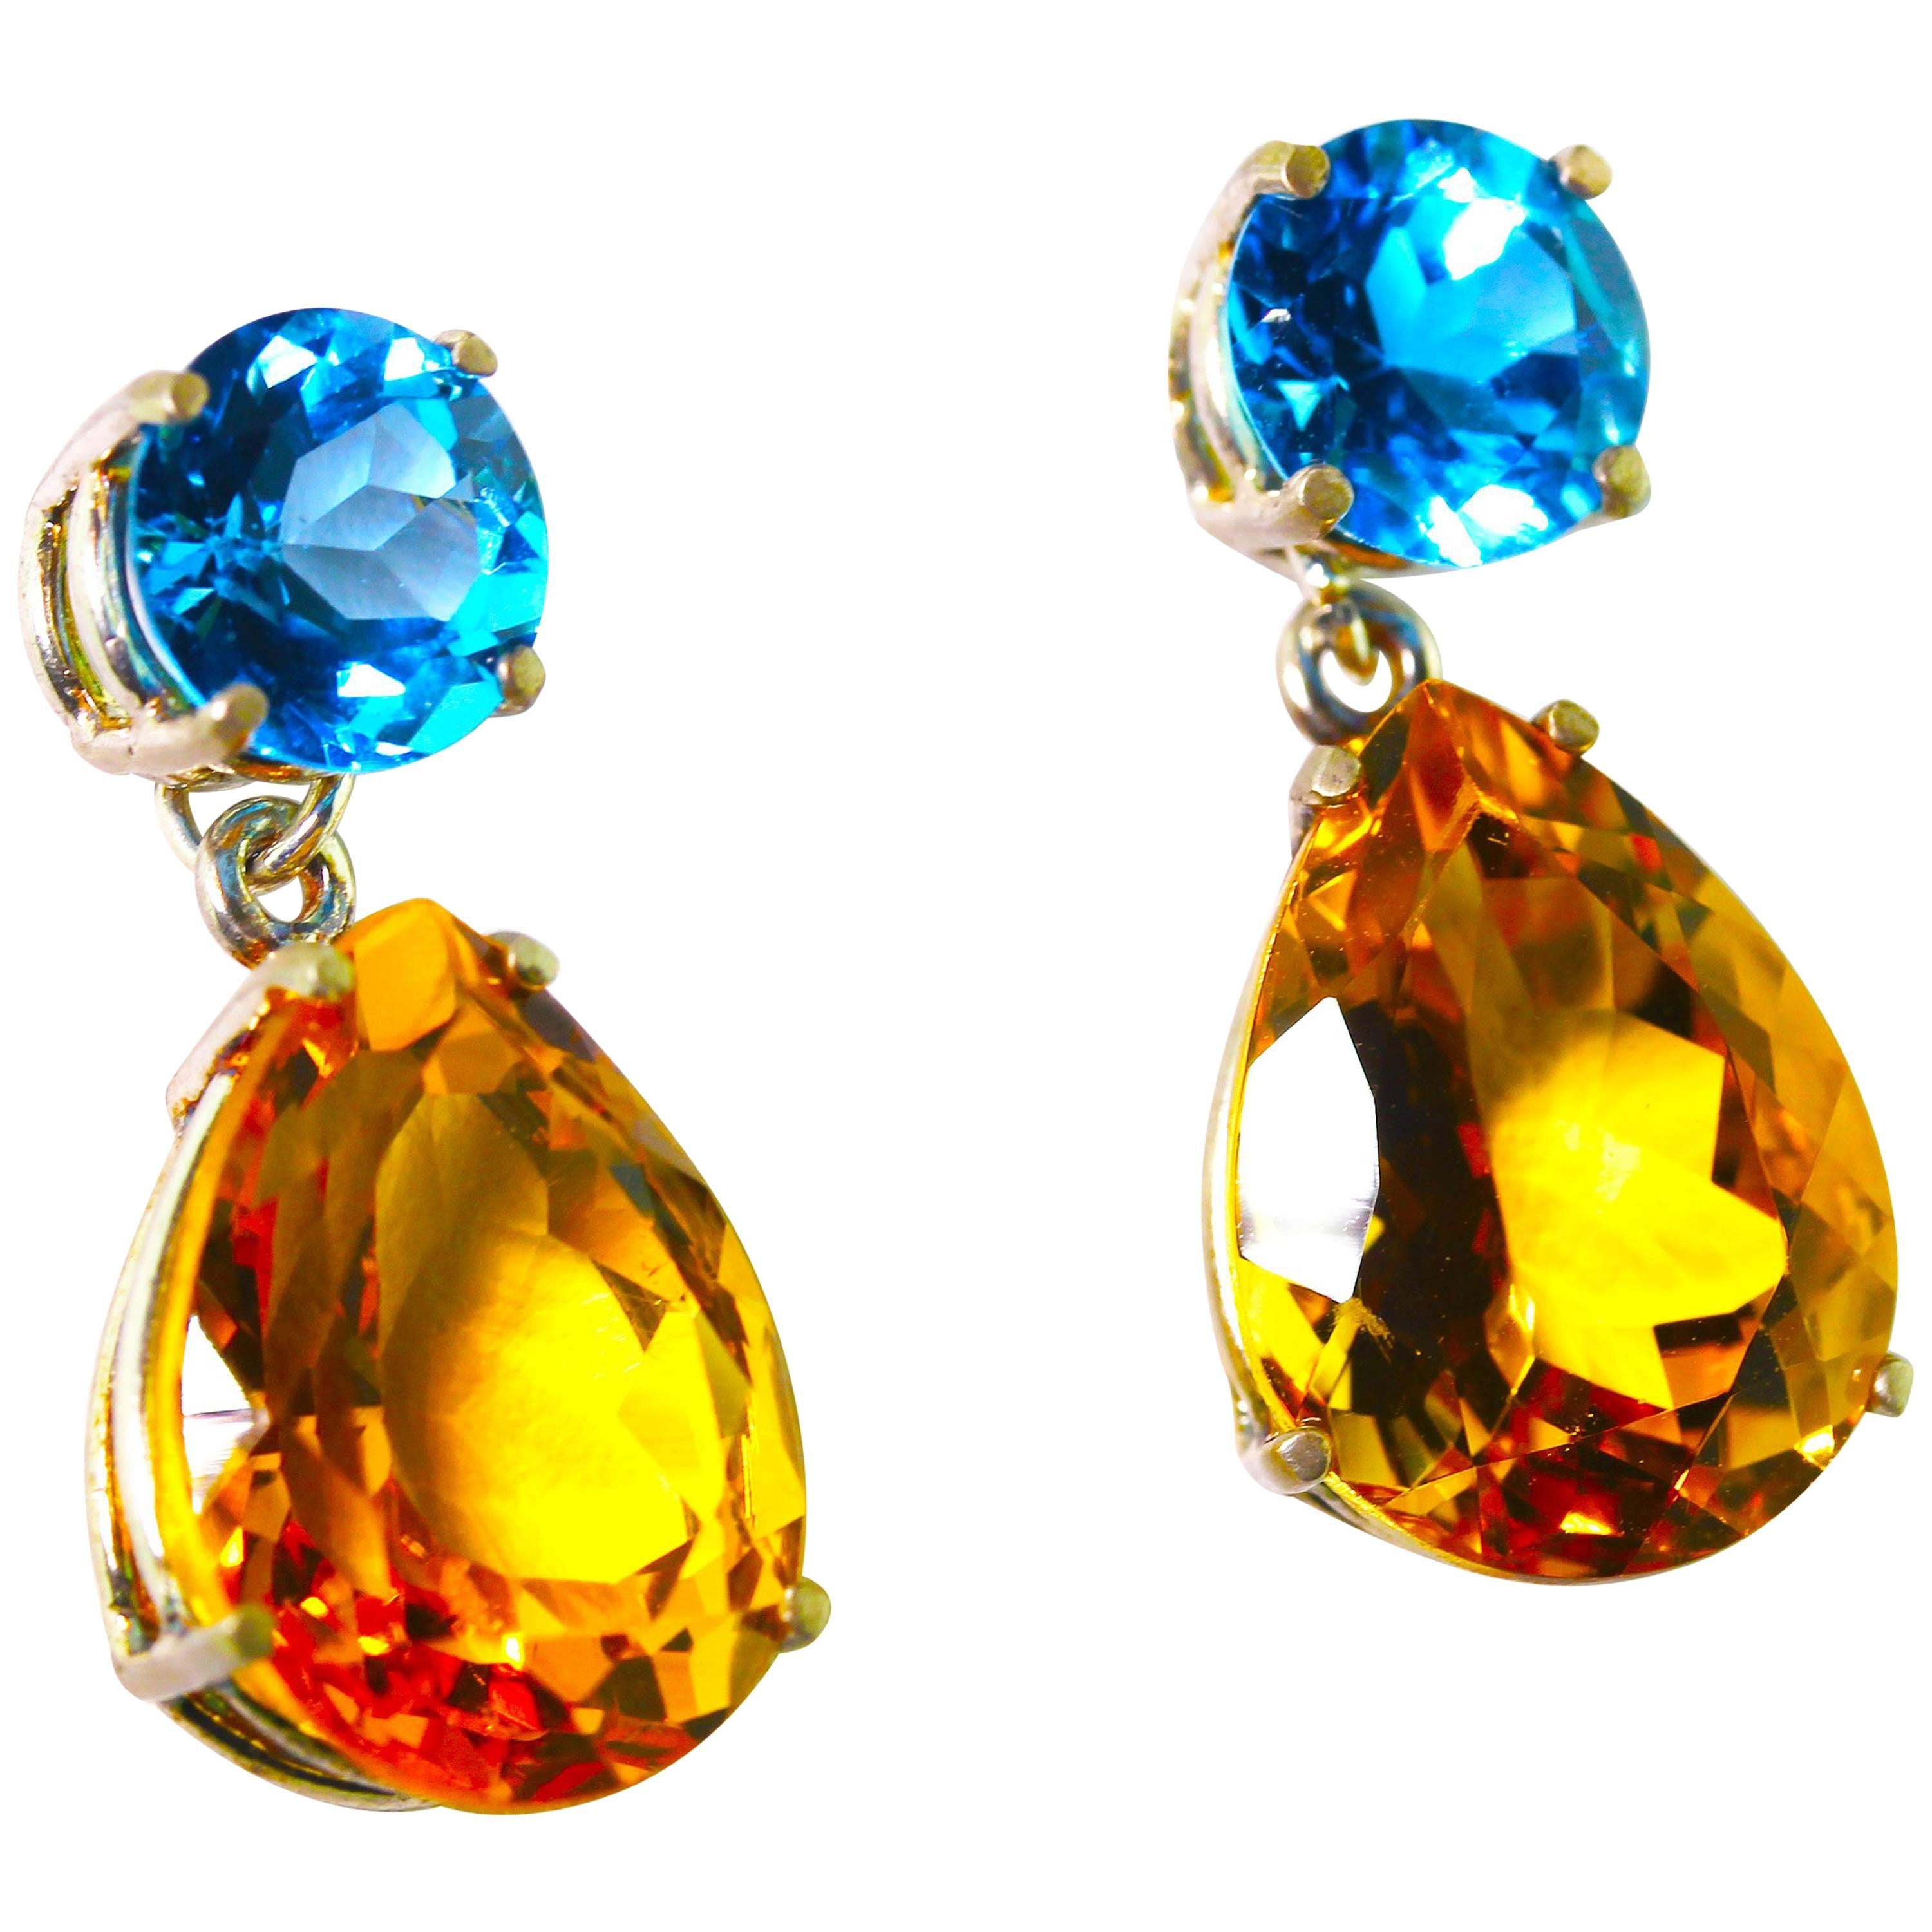 Unique Blue Topaz and Citrine Sterling Silver Stud Earrings